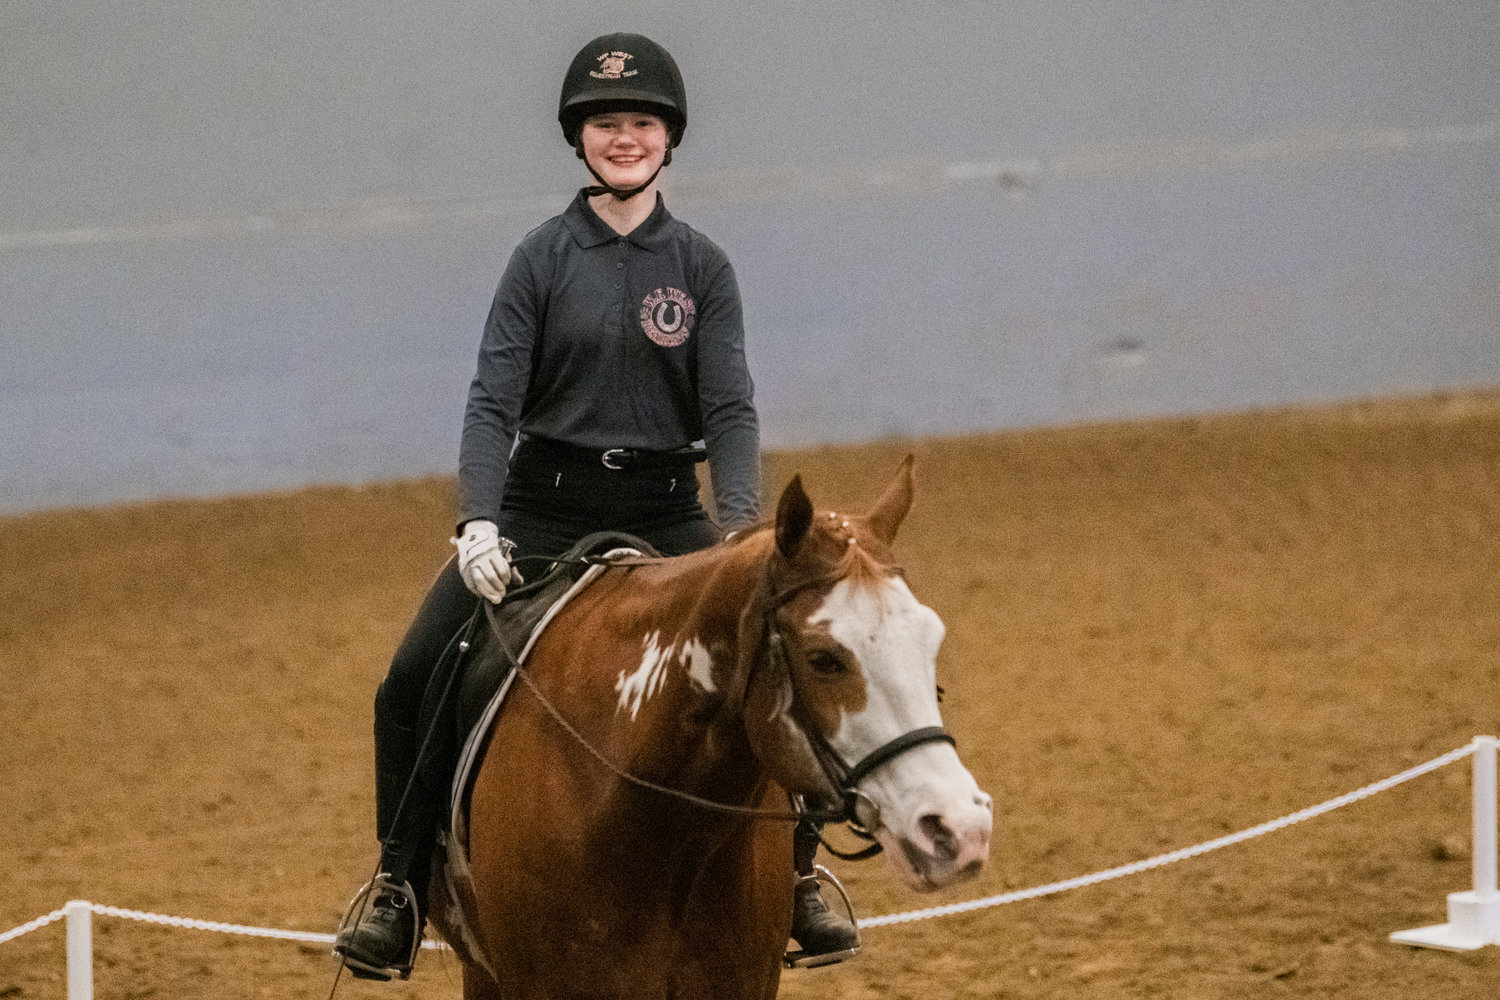 Maizy Samuelson, a freshman who is home-schooled, smiles after completing the dressage event in an equestrian meet on Saturday at the Grays Harbor County Fairgrounds.